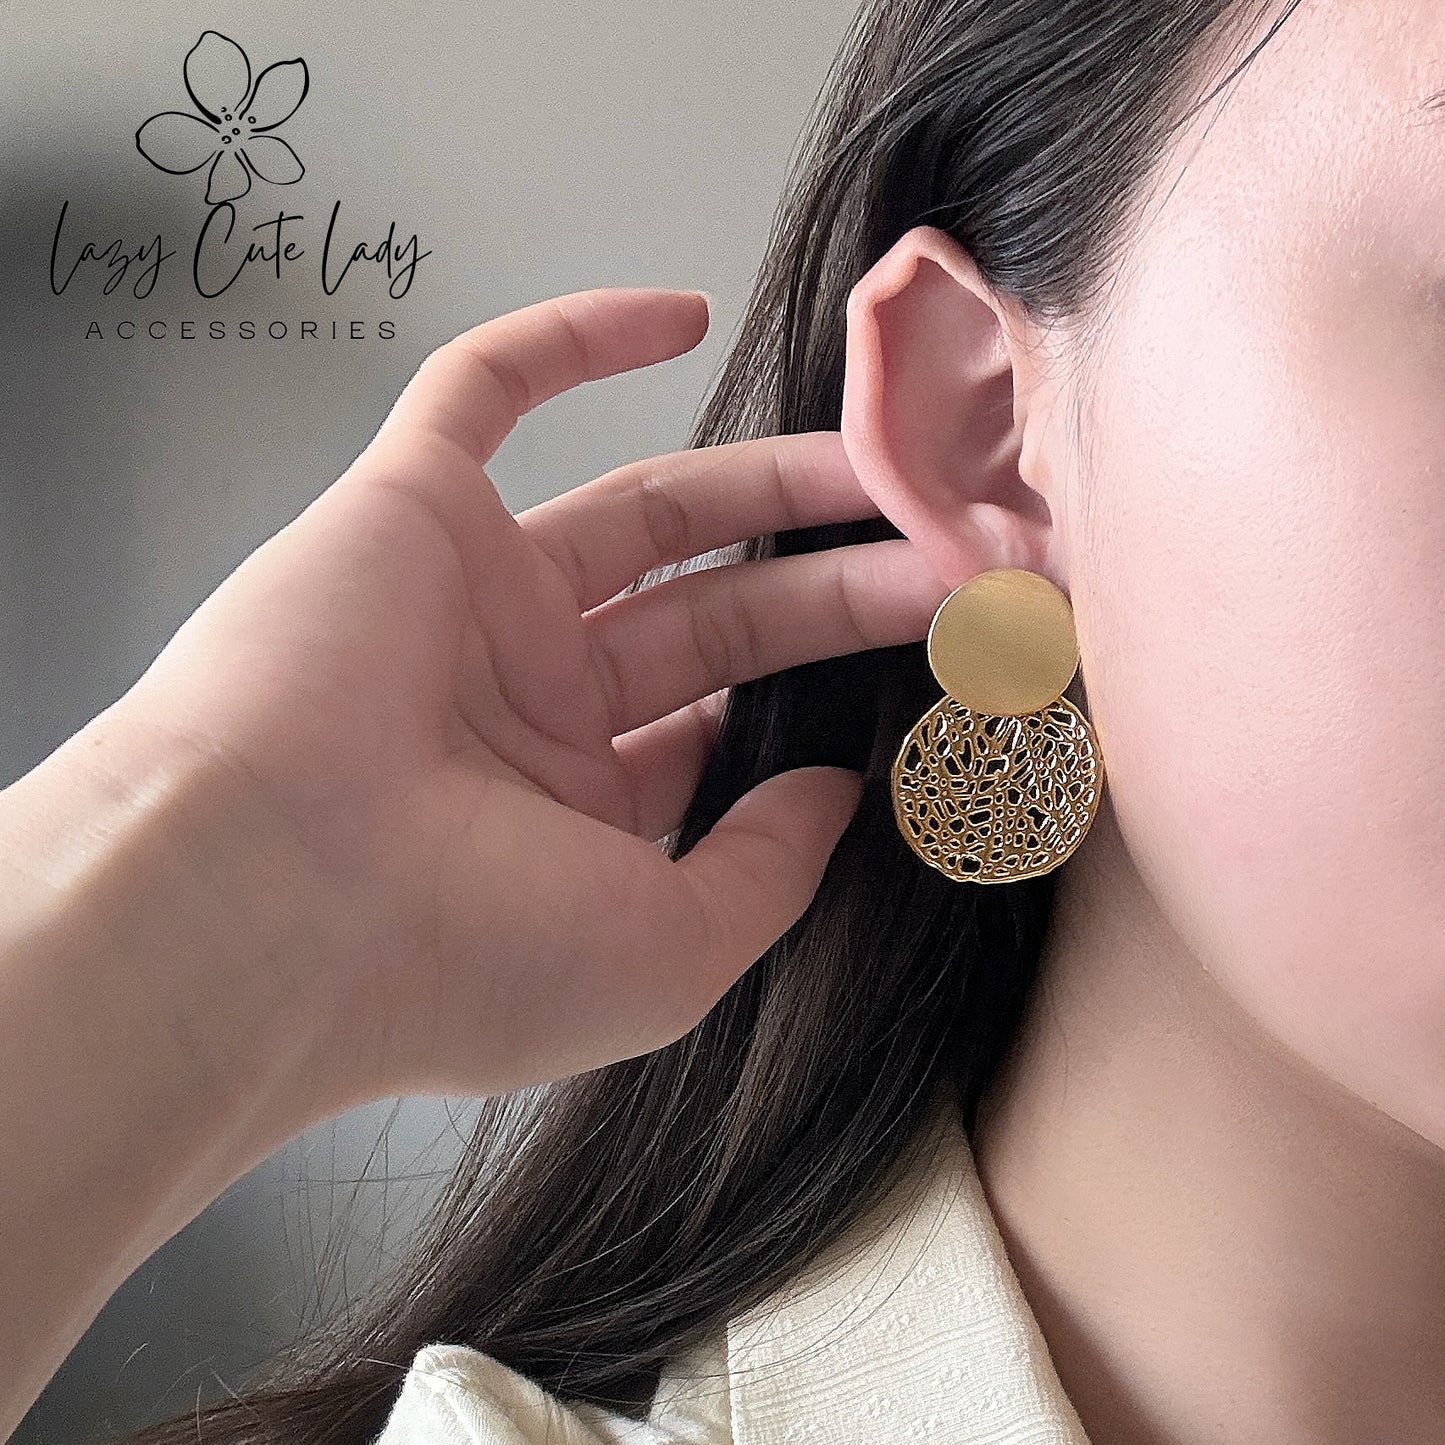 Lazy Cute Lady Accessories-Vintage Circles: Retro Metal Disc Drop Earrings- Gift - for girl for women